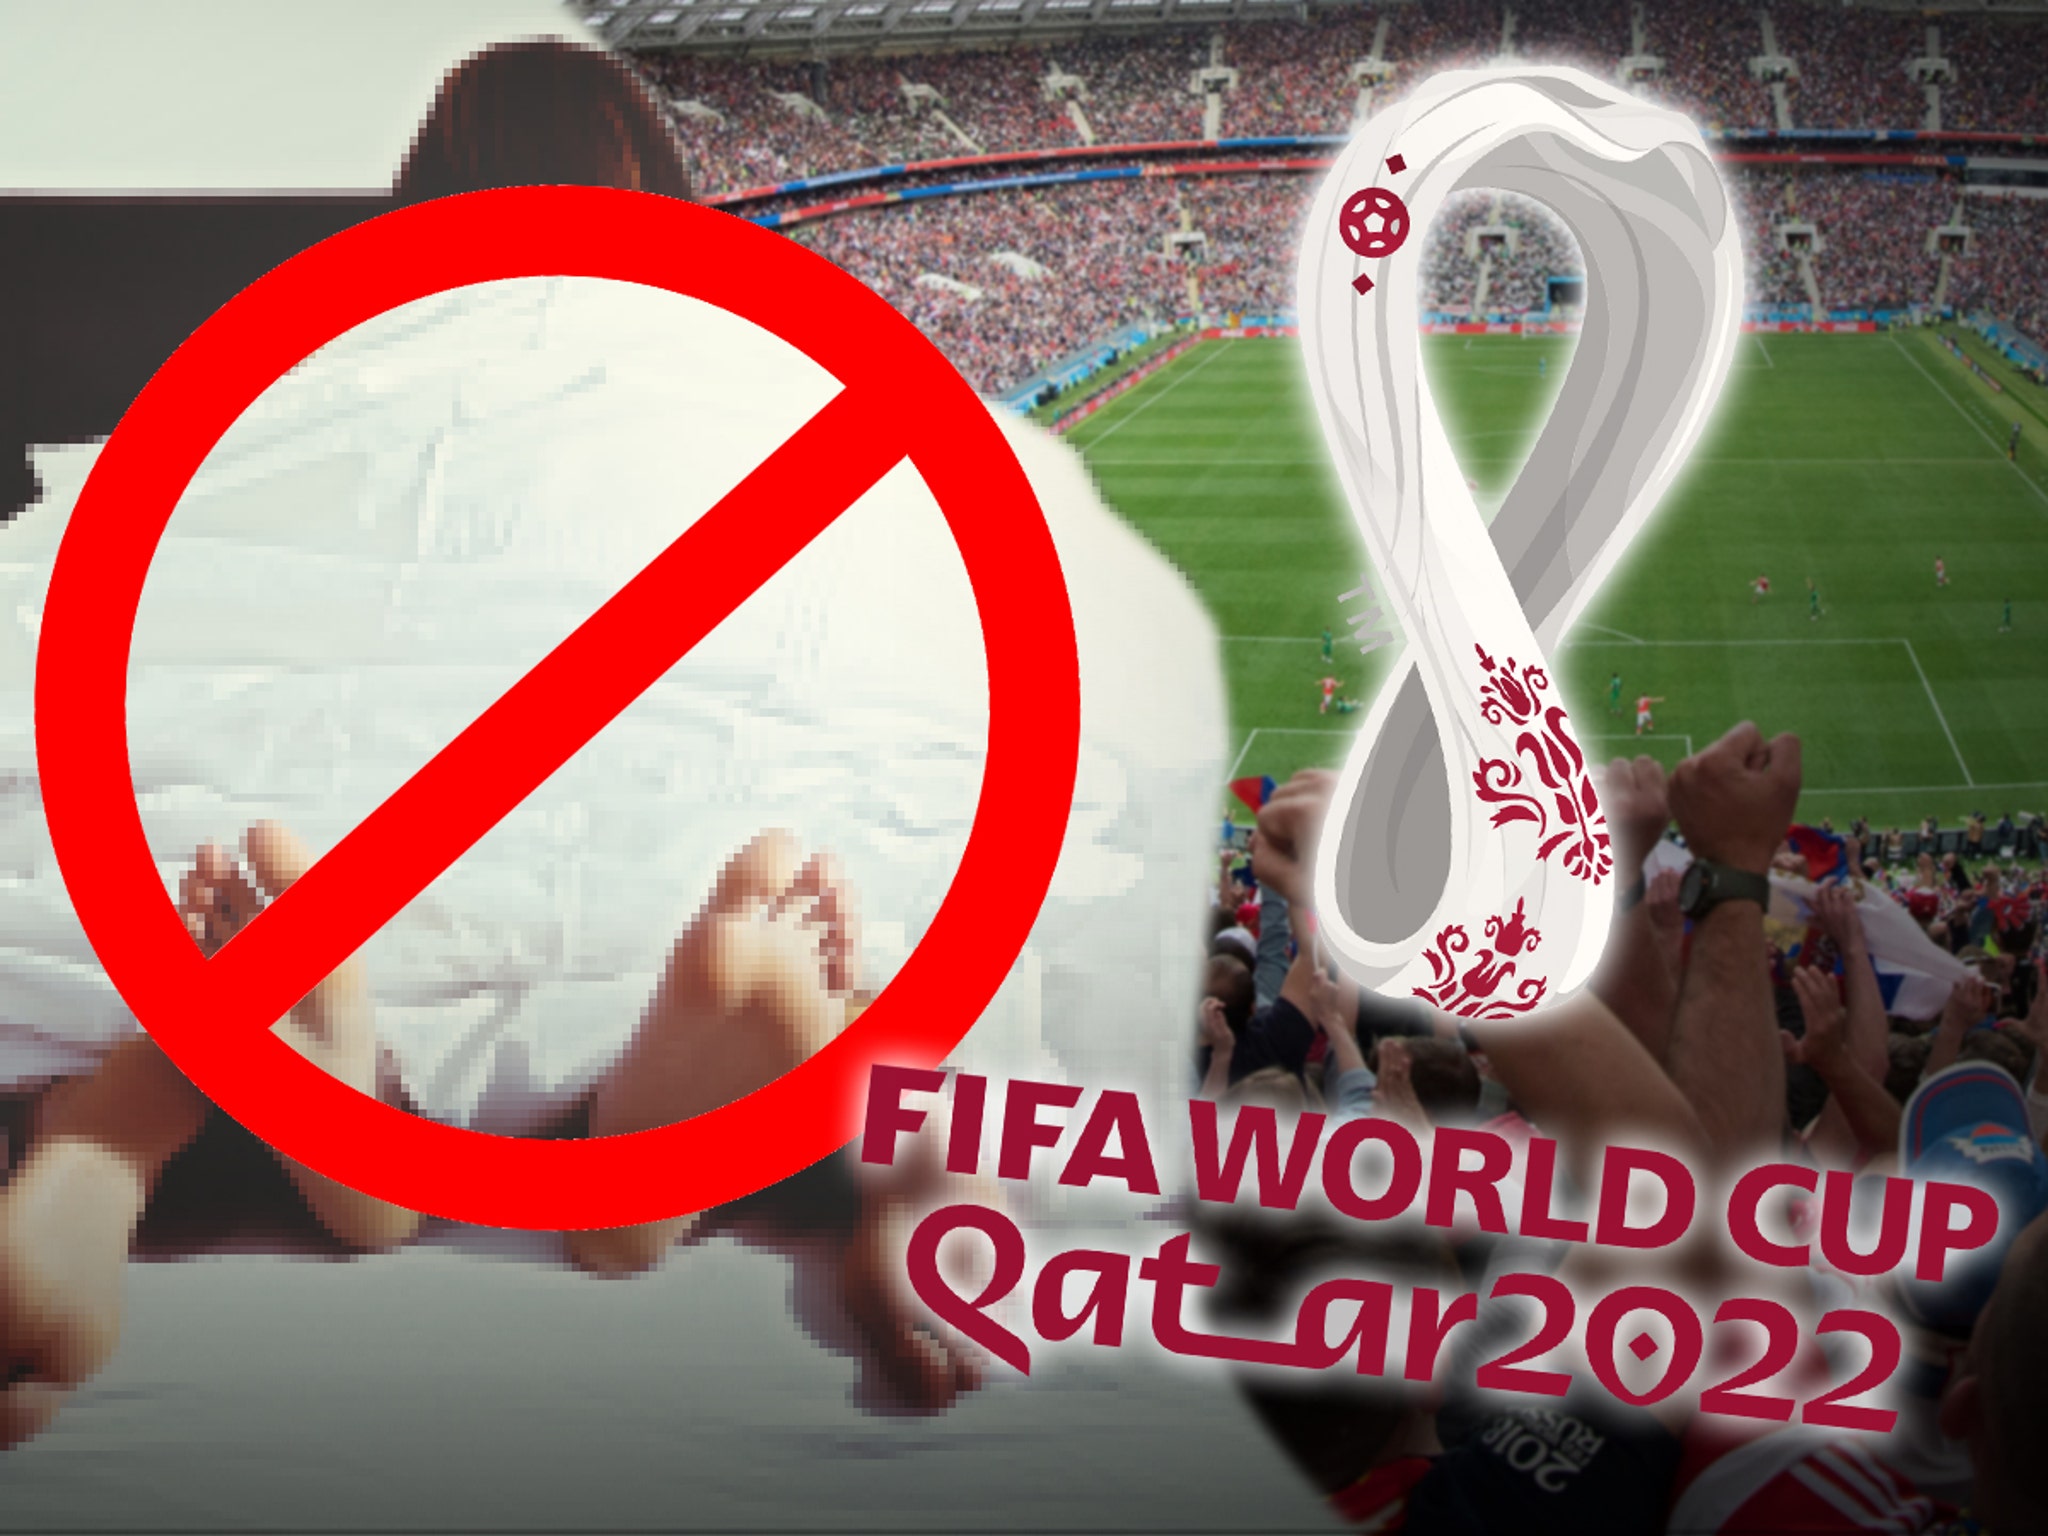 Qatar Reportedly Bans Single World Cup Fans From Sex, Could Face 7 Years Behind Bars image pic